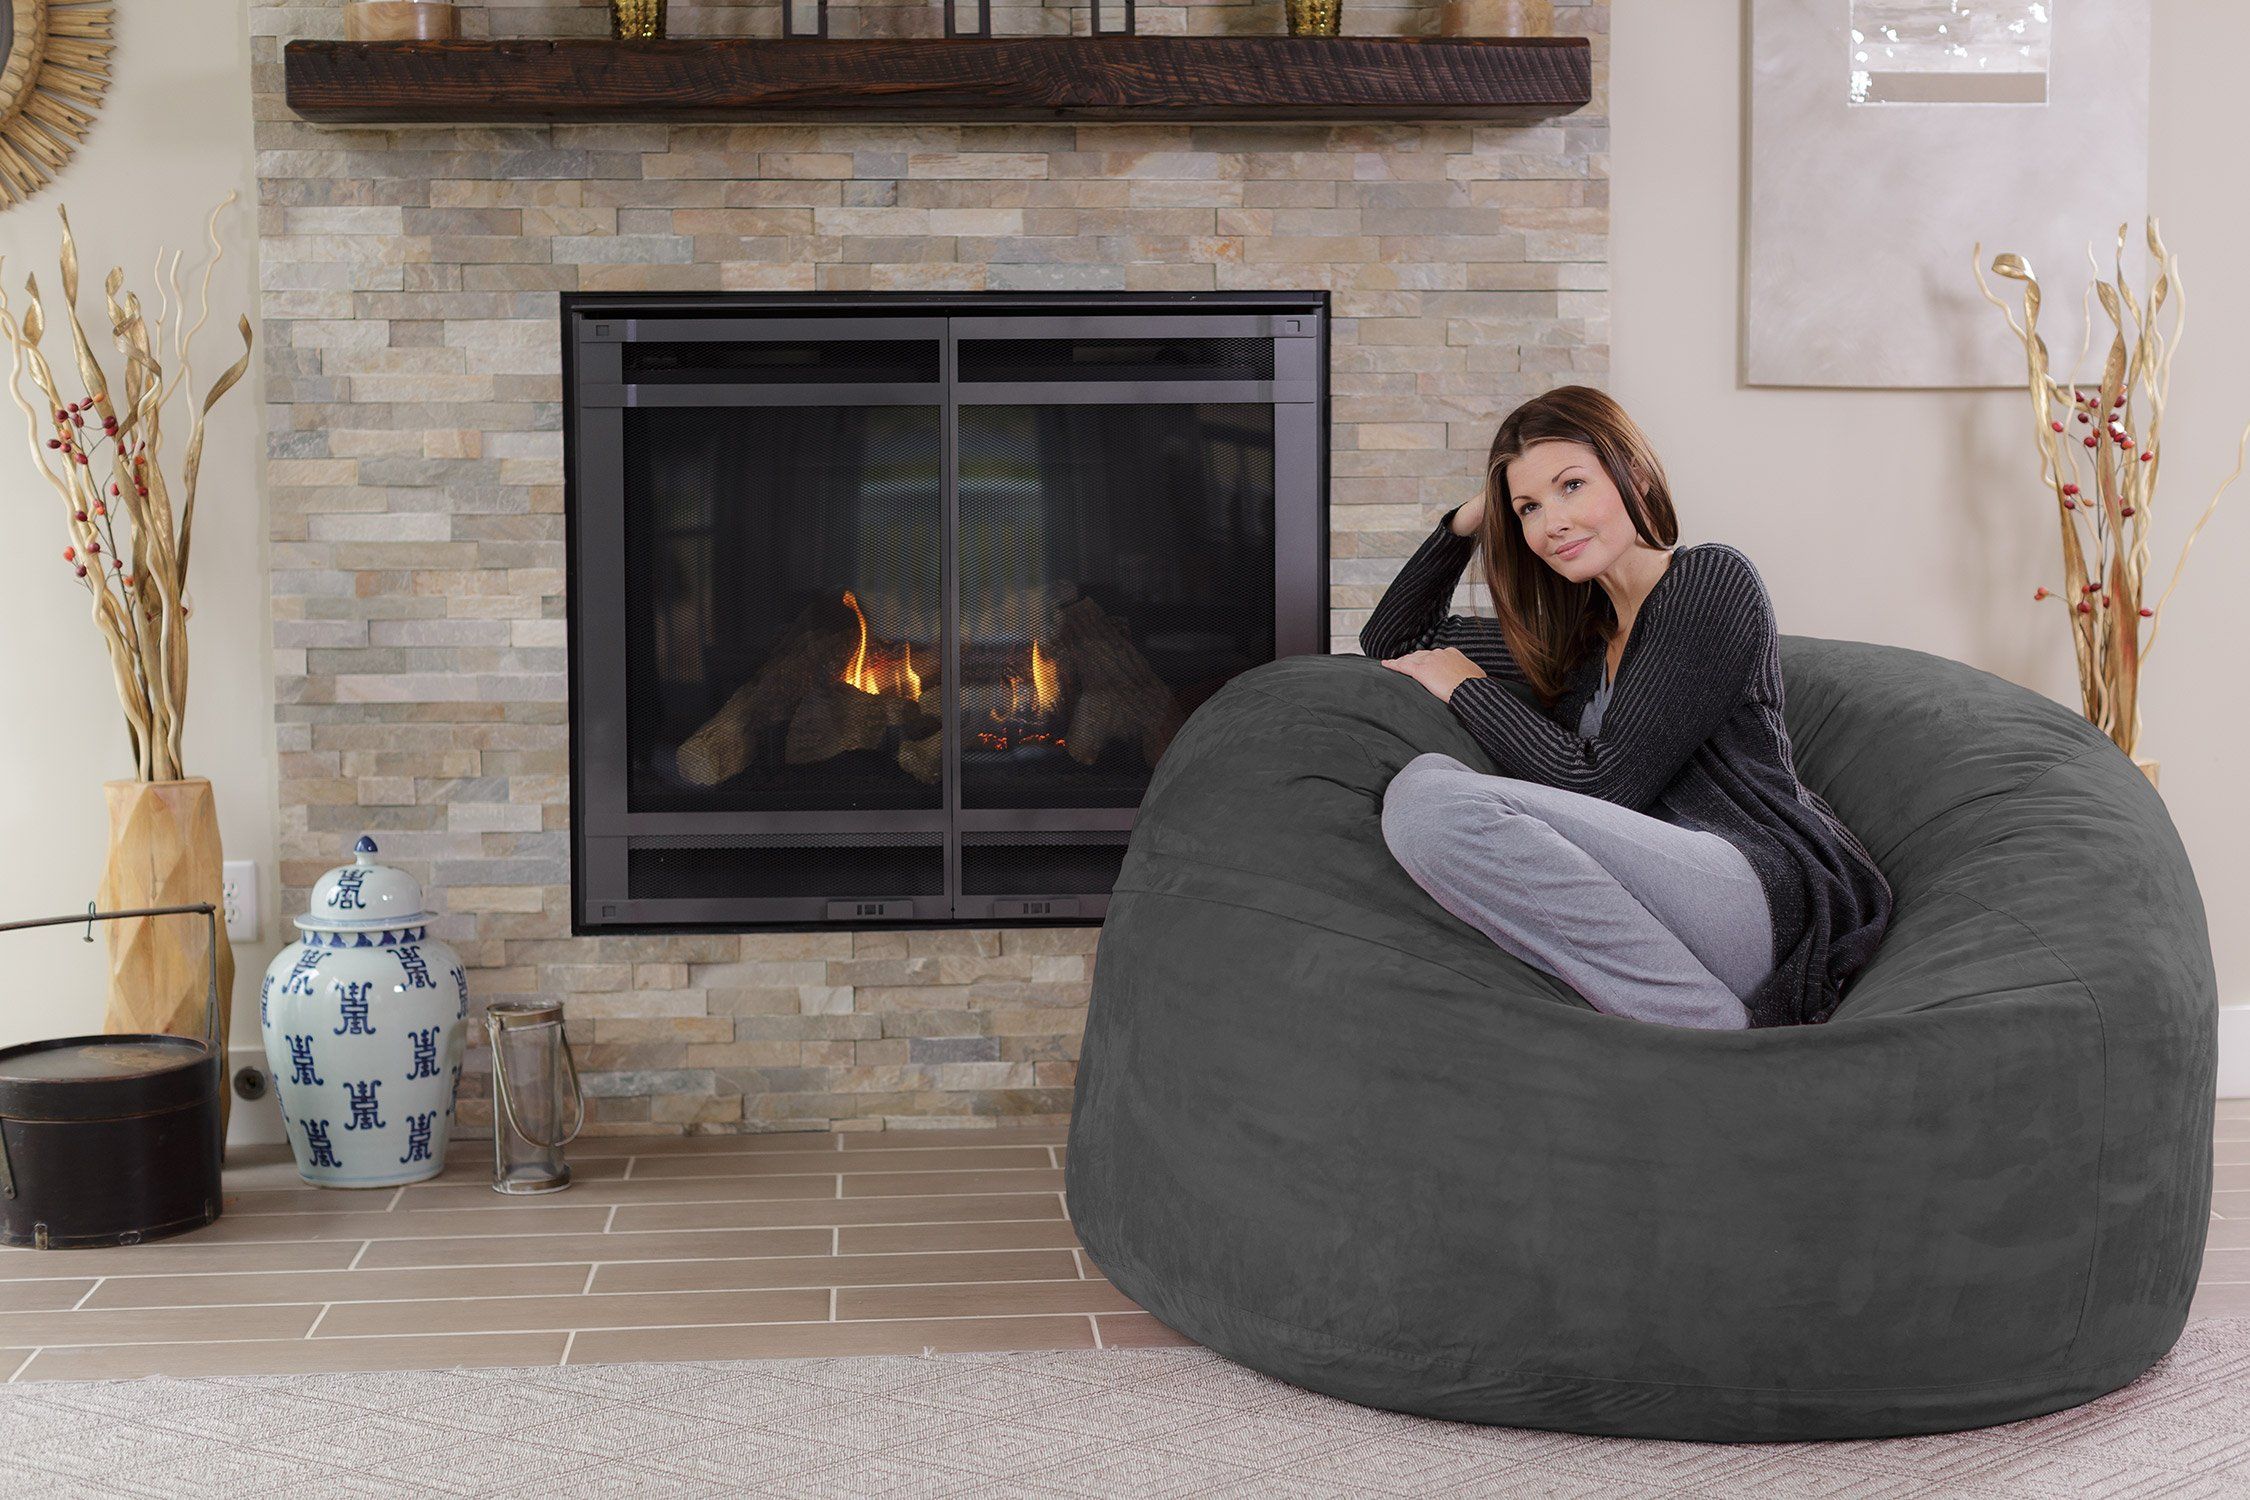 Giant Bean Bag: 6 Foot Bean Bag Chairs for Sale | Ultimate Sack